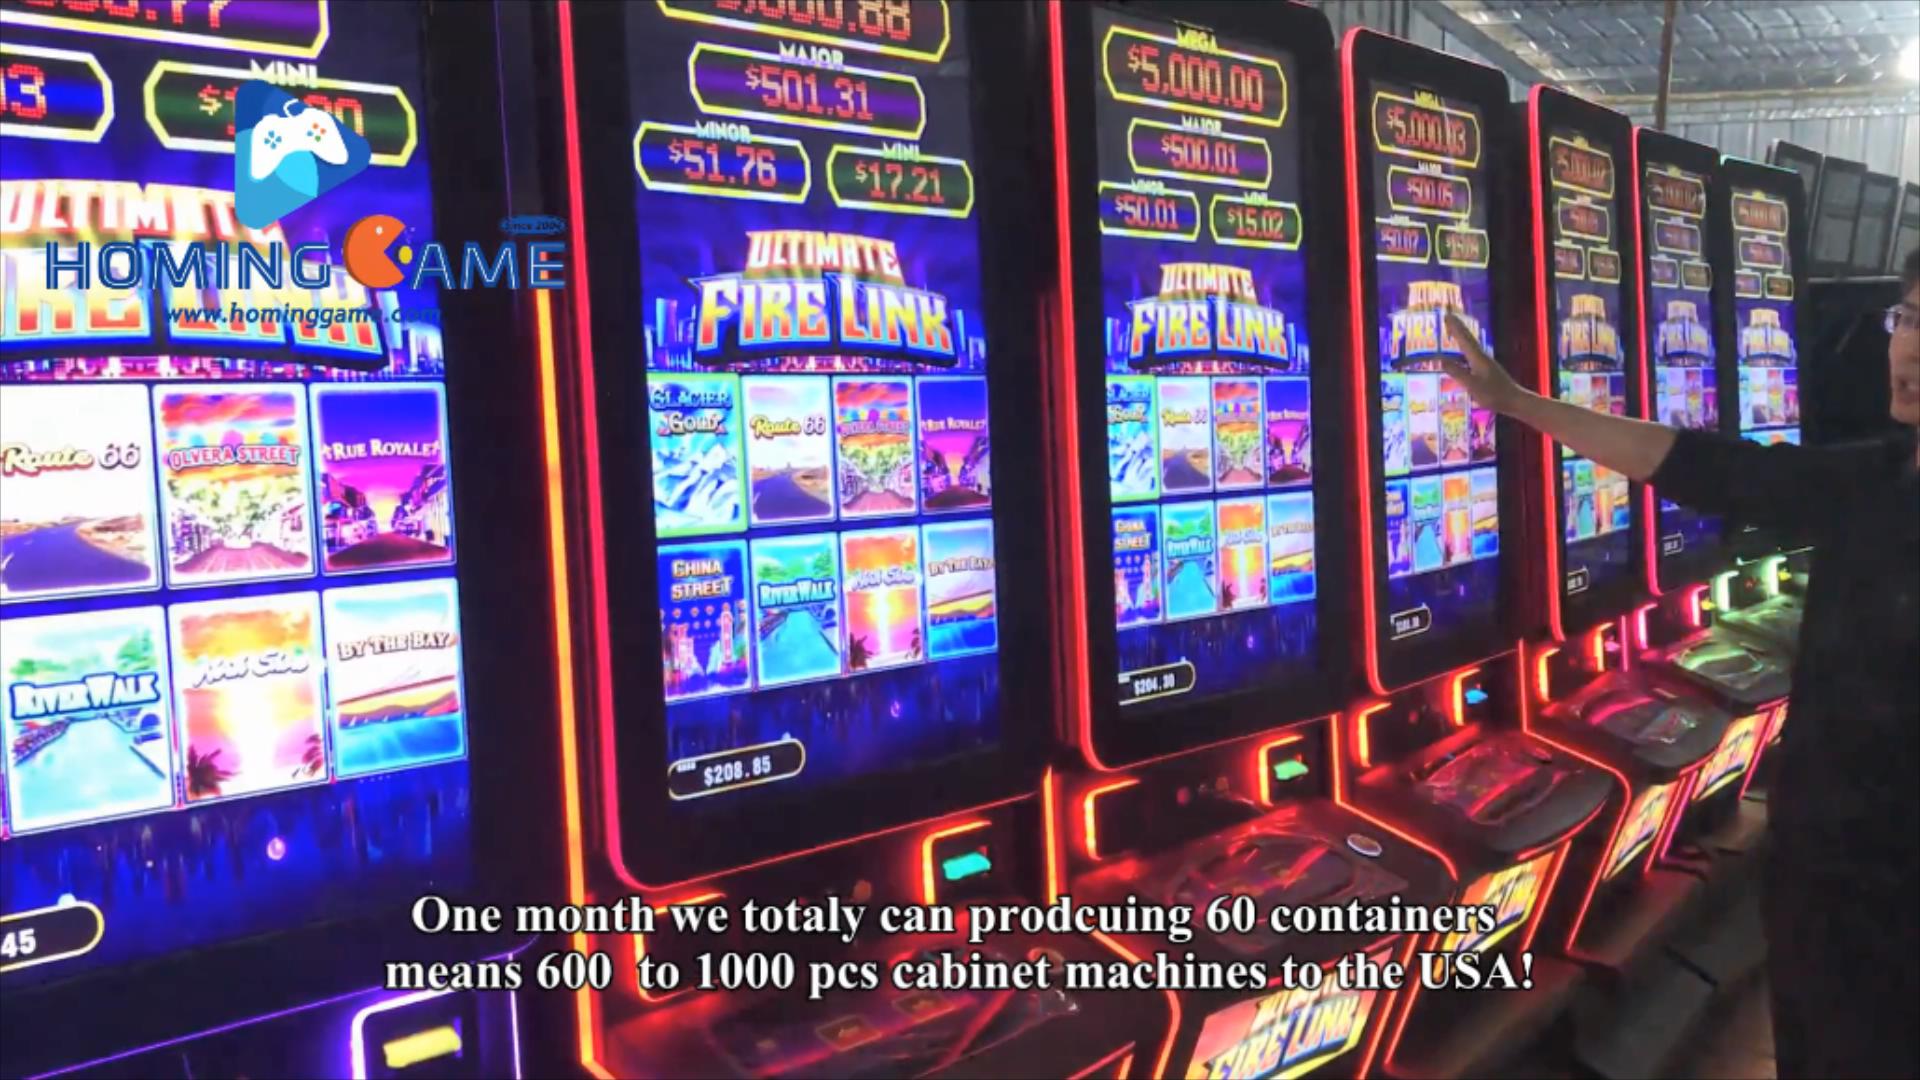 2021 USA Best Slot Table Game Machine Manufactuer By HomingGame Producing All kind of Slot Table,Fire link,Dragon link,Fusion 4,golden master,money gold,lighting ,panda link slot table game machine (Order Call Whatsapp:+8618688409495),43' touch curve monitor 8 in 1 fire link slot table game machine,8 in 1 fire link slot game machine,slot table game machine,43' touch screen fire link slot game machine,43' touch monitor fire link slot table game machine,43' curve touch monitor fire link slot gaming machine,dragon link slot game machine,panda link slot game machine,golden buffalo slot game machine,fusion 4 slot game machine,ultimate fire link,ultimate fire link slot game machine,ultimate fire link slot game,fire link slot game machine,fire link,ultimate fire link slot gaming machine,ultimate fire link slot table gaming machine,slot game,slot table game,slot gaming machine,game machine,arcade game machine,coin operated game machine,arcade game machine for sale,amsuement machine,entertainment game machine,family entertainment game machine,hominggame,www.gametube.hk,indoor game machine,casino,gambling machine,electrical game machine,slot,slot game machine for sale,slot table for sale,simulator game machine,video game machine,video game,video game machine for sale,hominggame fire link slot game,slot gaming